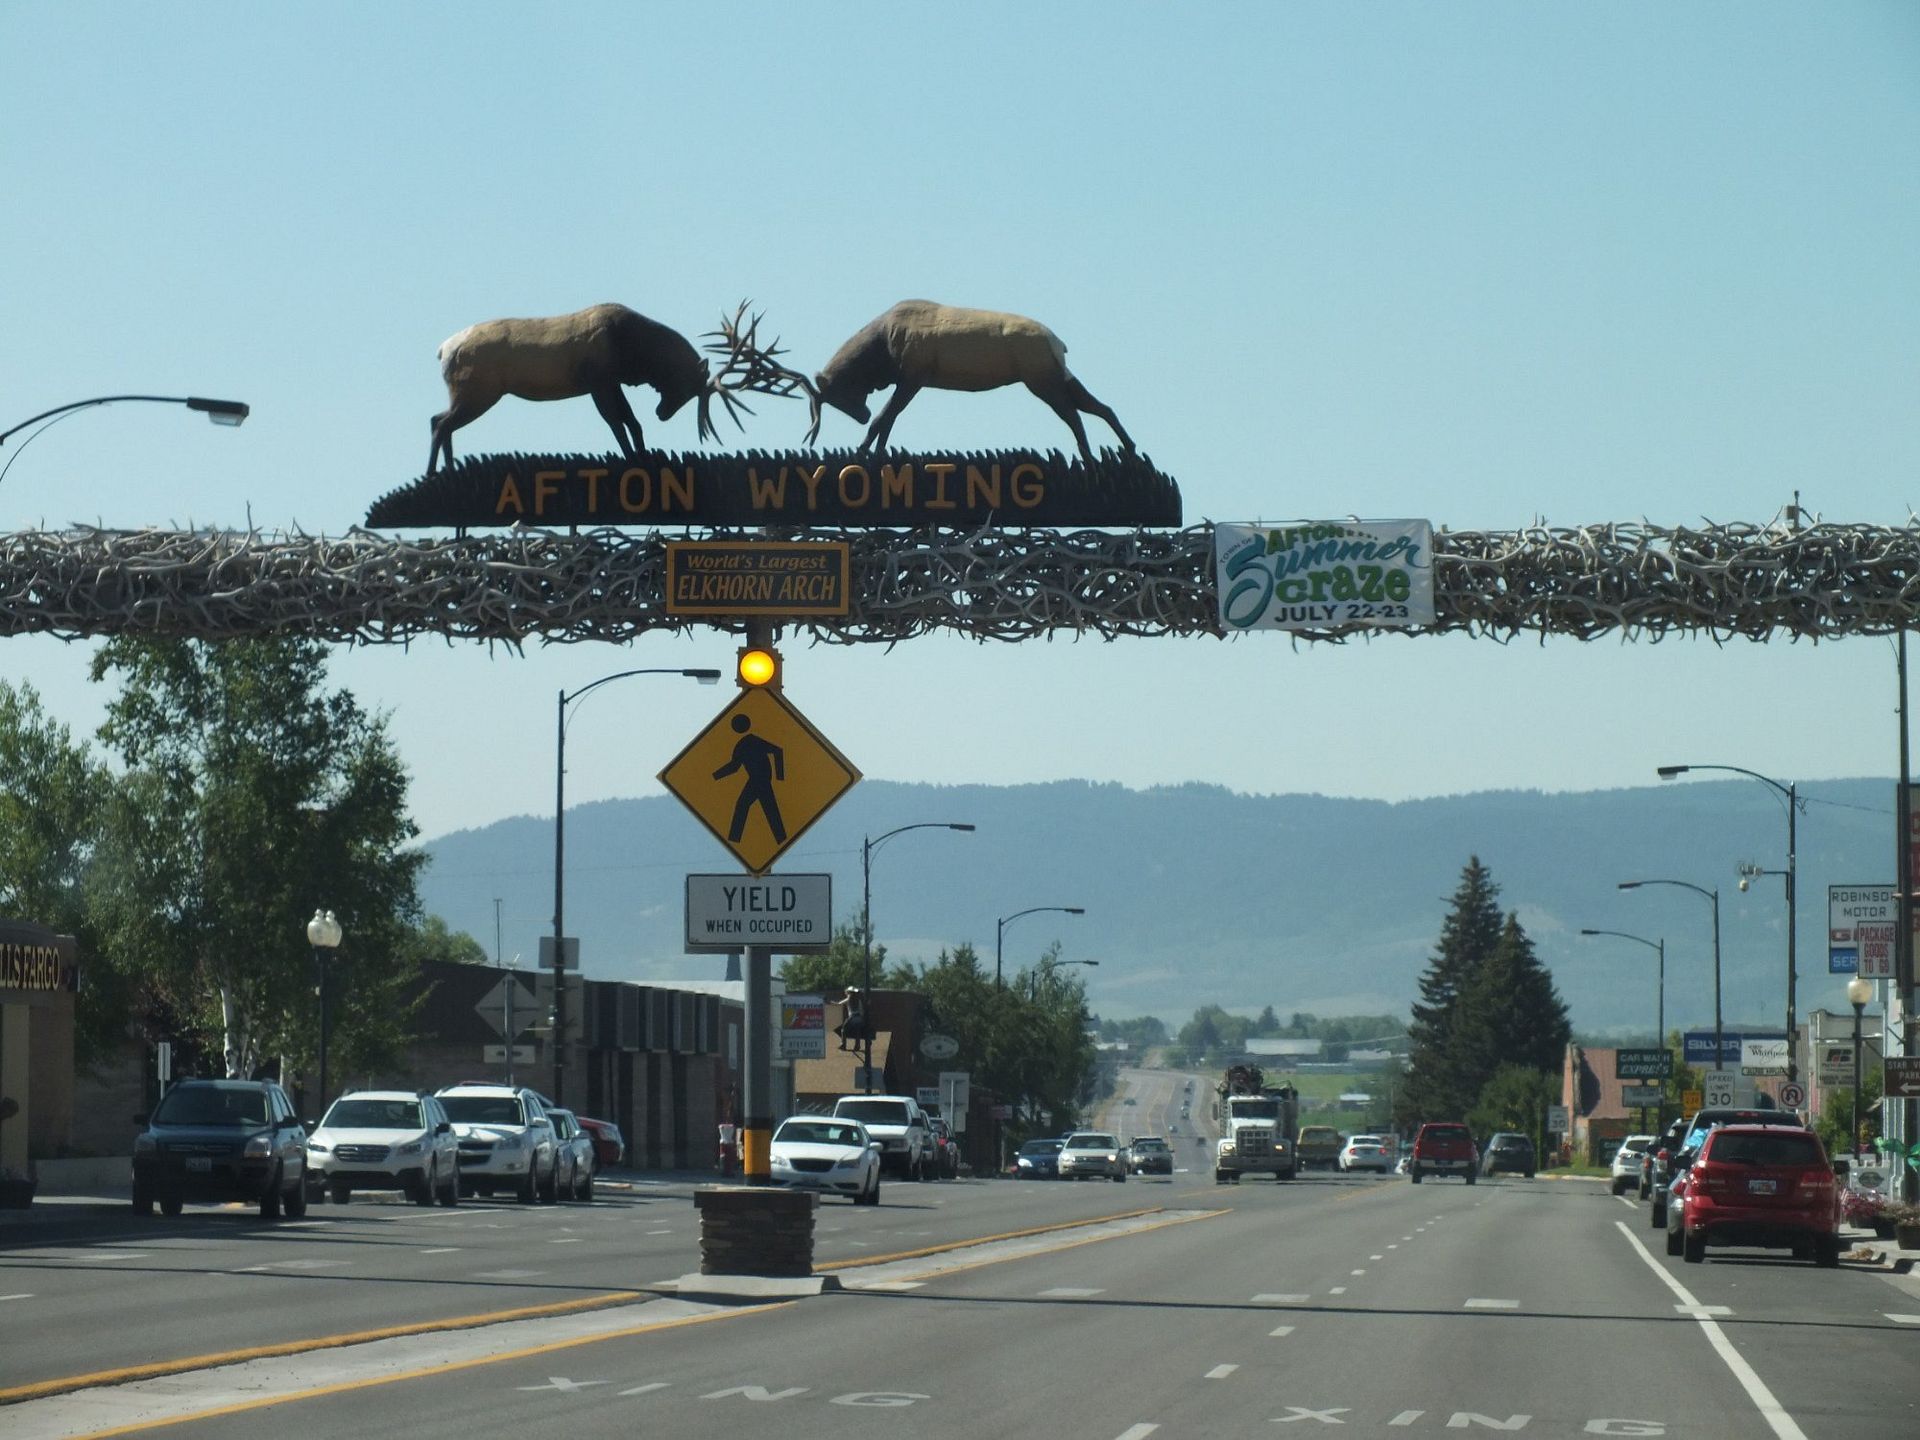 
World's Largest Elkhorn Arch, world record in Afton, Wyoming